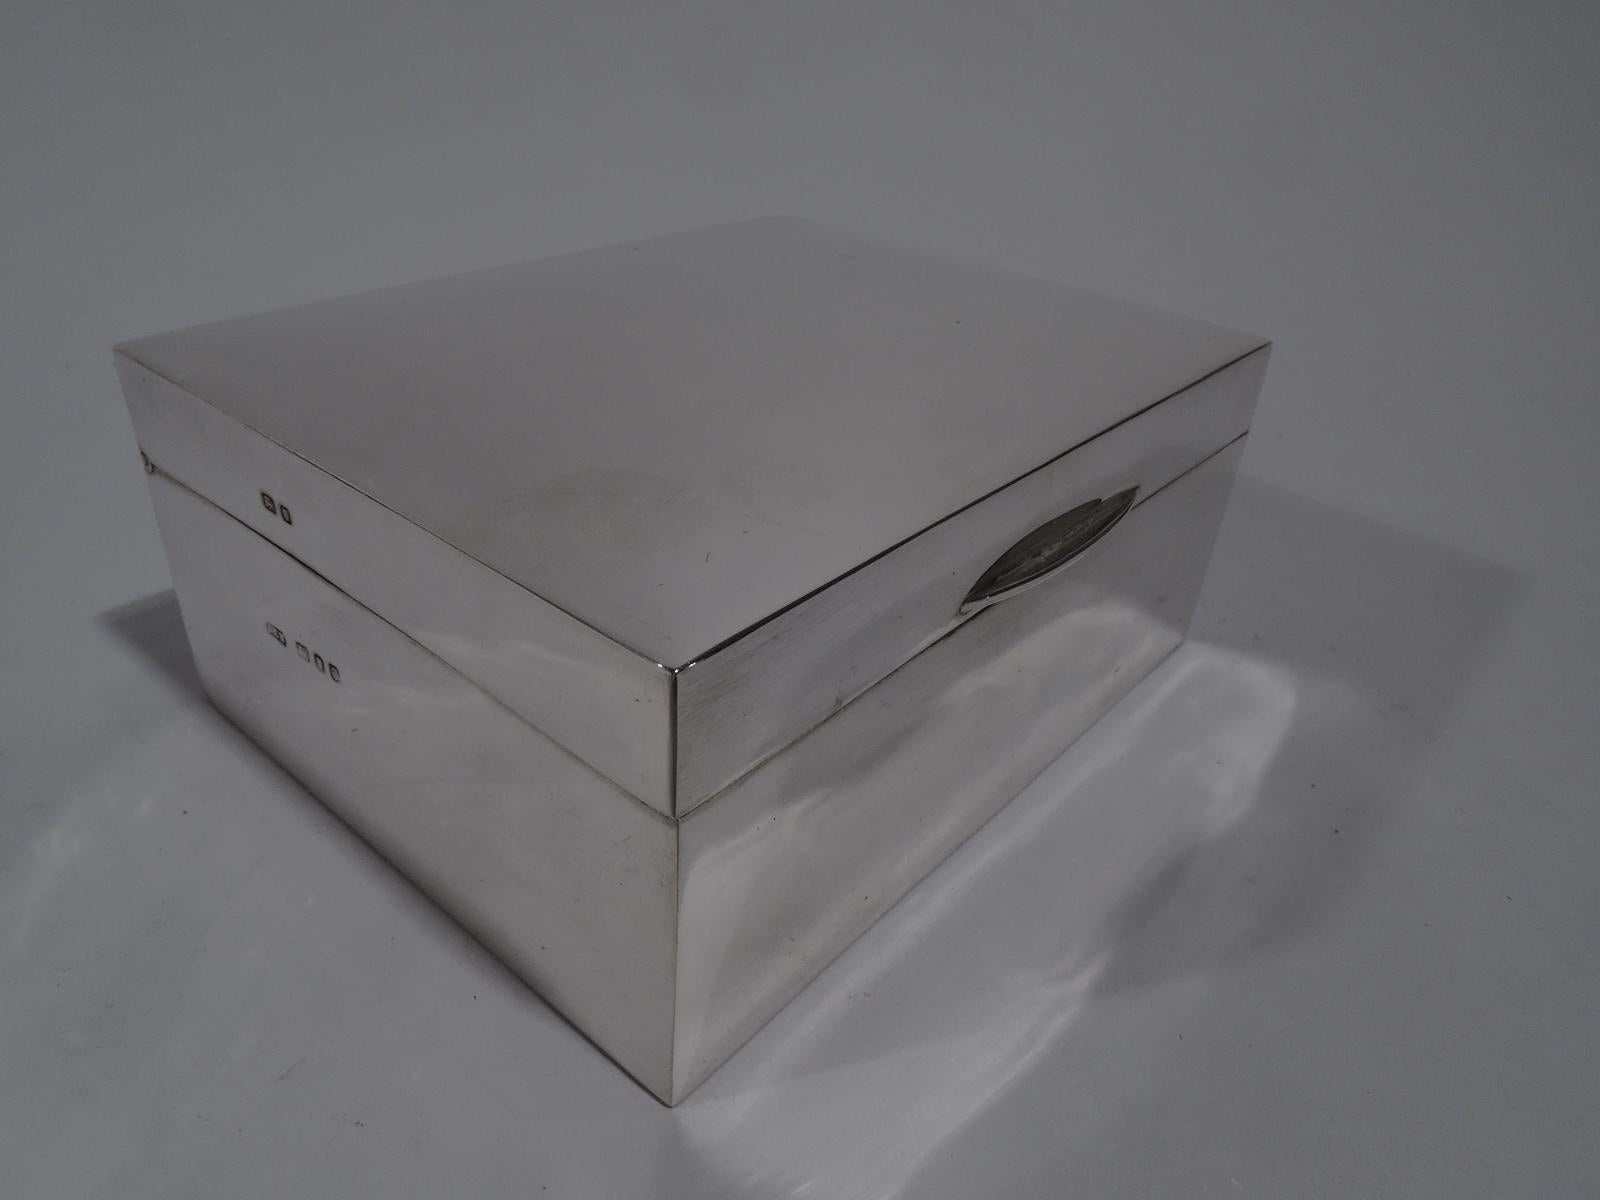 English Modern sterling silver desk box, 1958. Rectangular with straight sides. Cover hinged, tabbed, and gently curved. Box and cover interior cedar-lined and partitioned. Box underside leather lined. Fully marked including unidentified maker’s